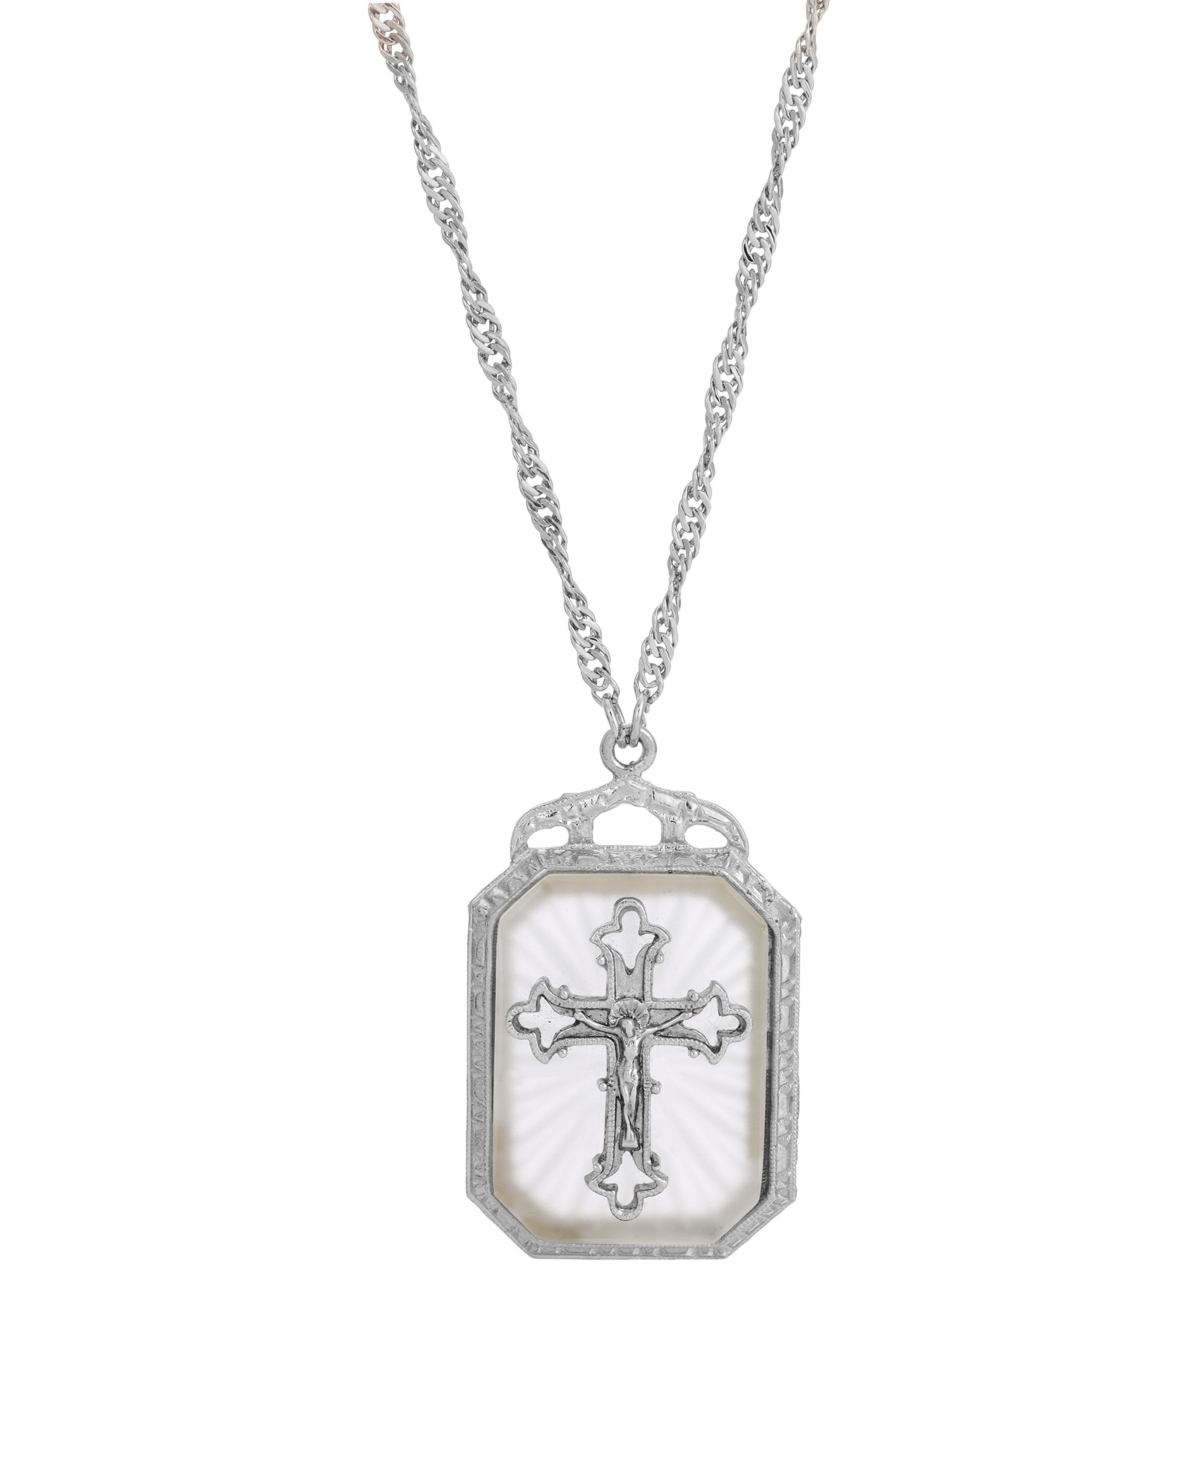 Silver-Tone Frosted Stone with Crystal Cross Large Pendant Necklace - White